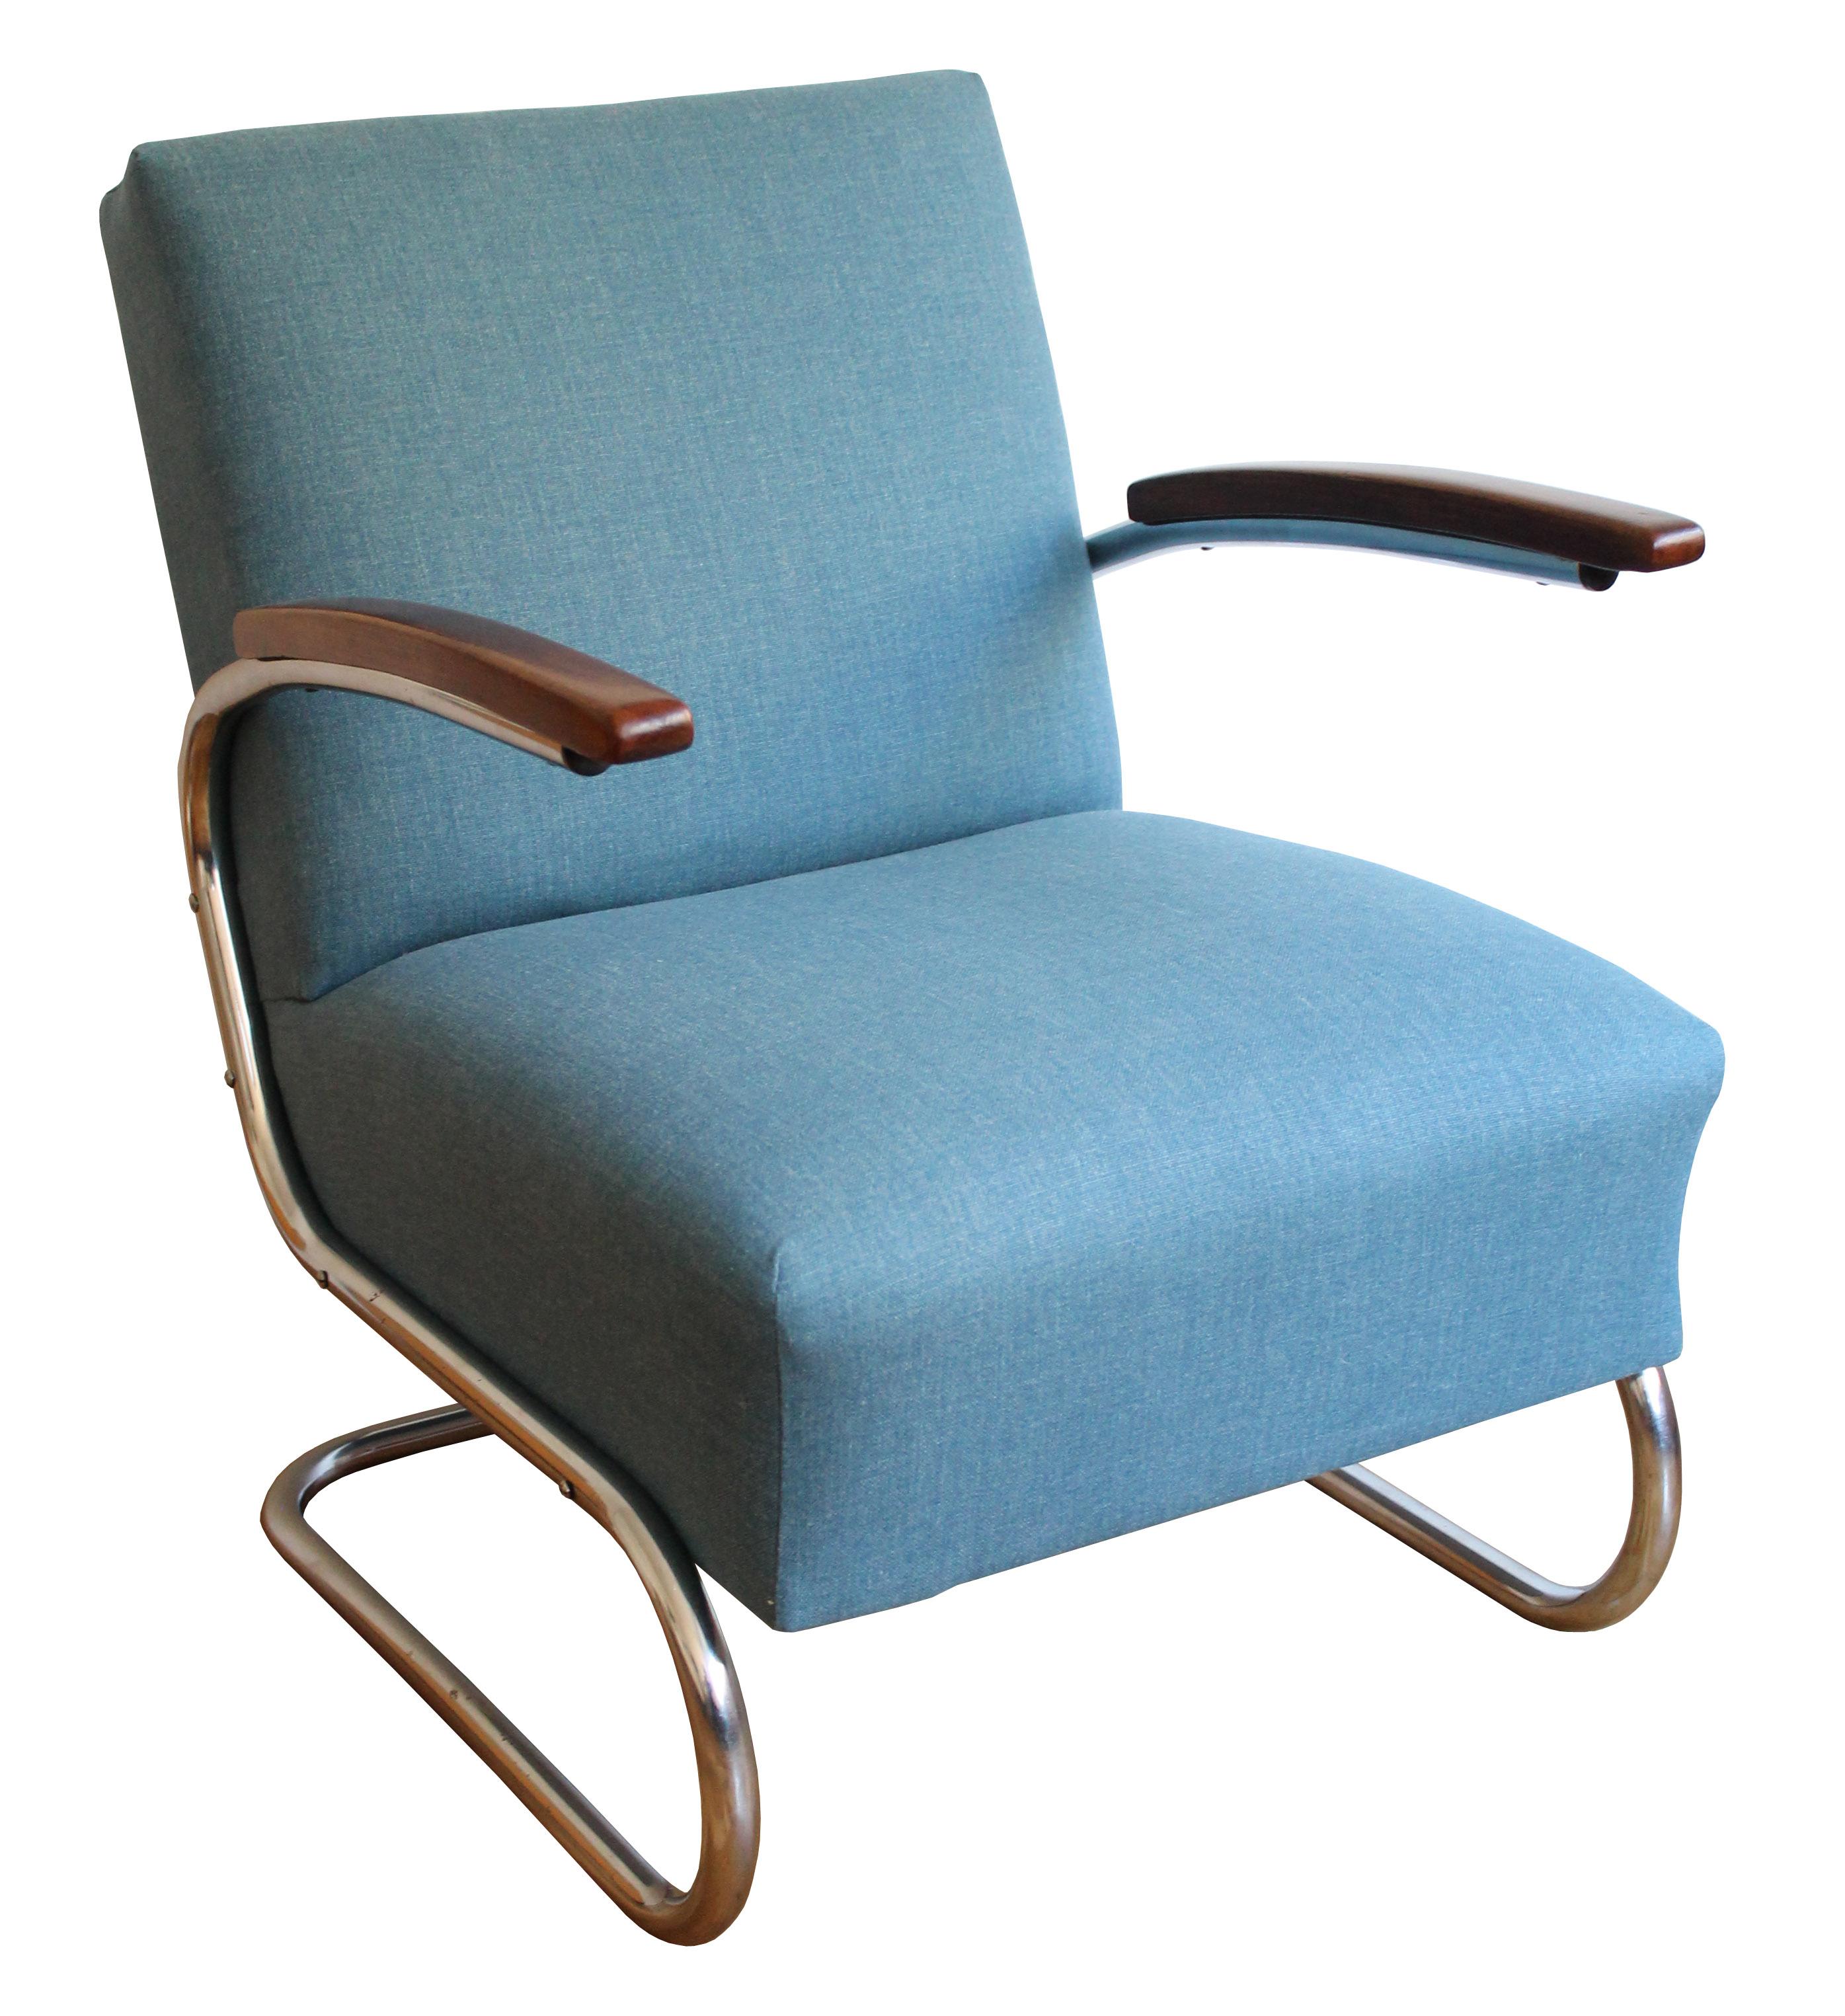 Mid-20th Century 1930's Modernist Lounge Chair by Walter Schneider and Paul Hahn